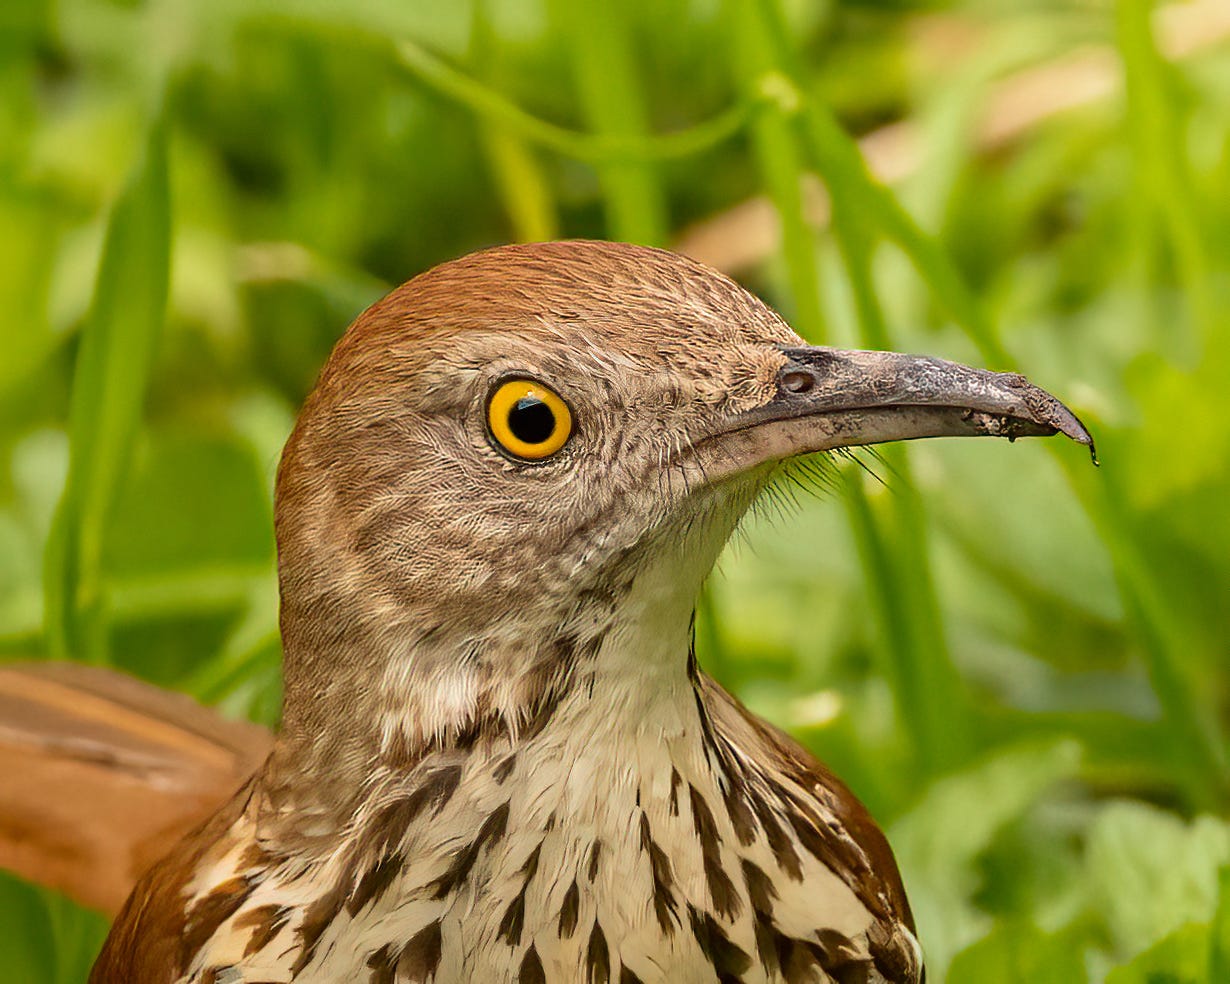 A brown thrasher in a close up photograph. The thrasher has a rusty color and deeply yellow eyes. This thrasher has mud and seeds on his beak.